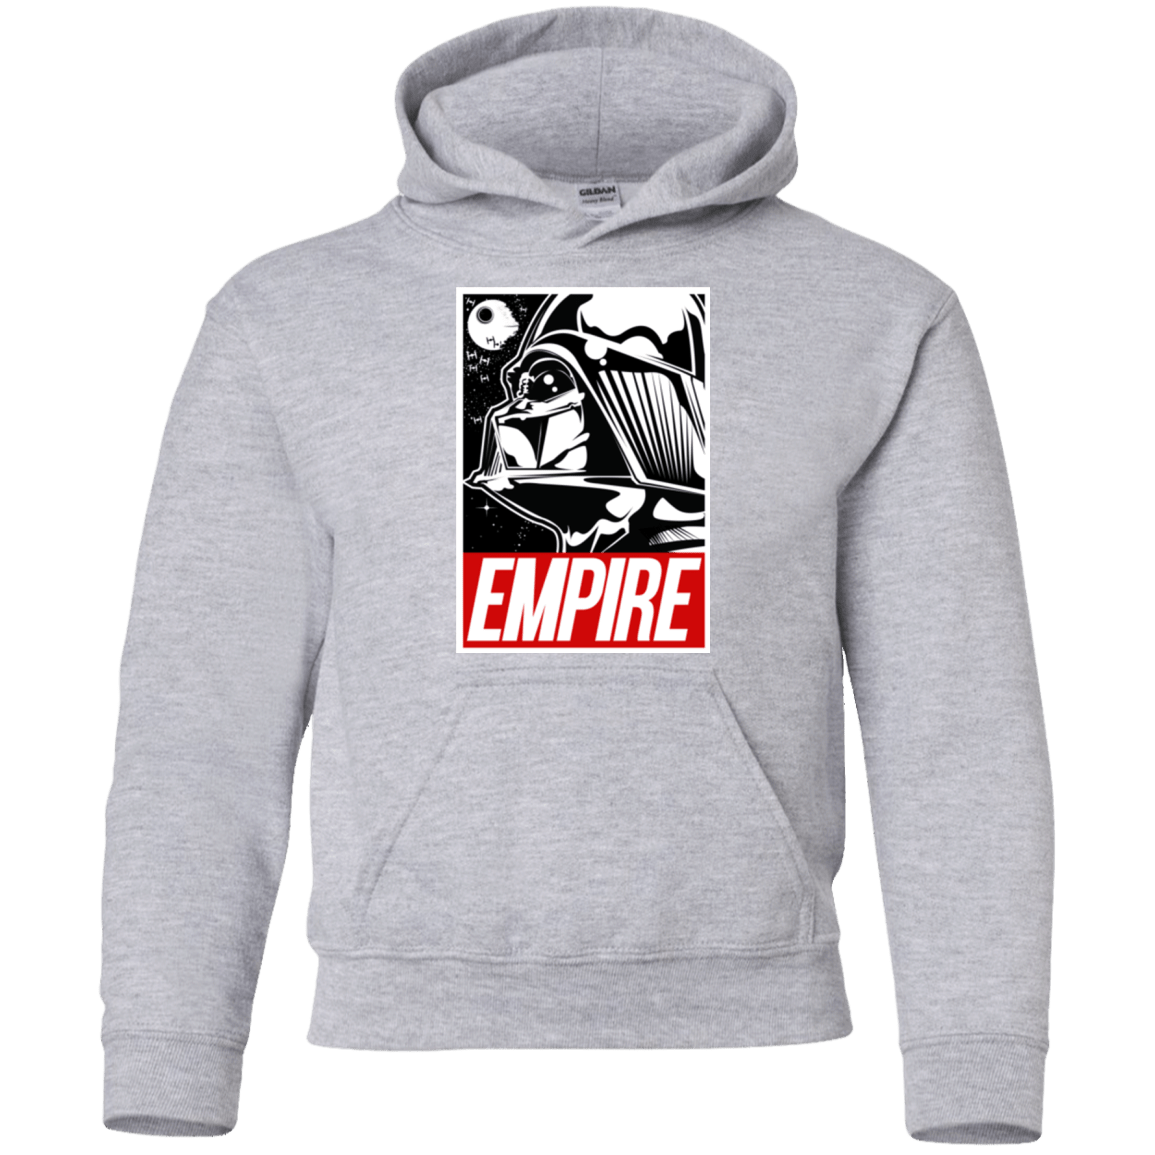 EMPIRE Youth Hoodie